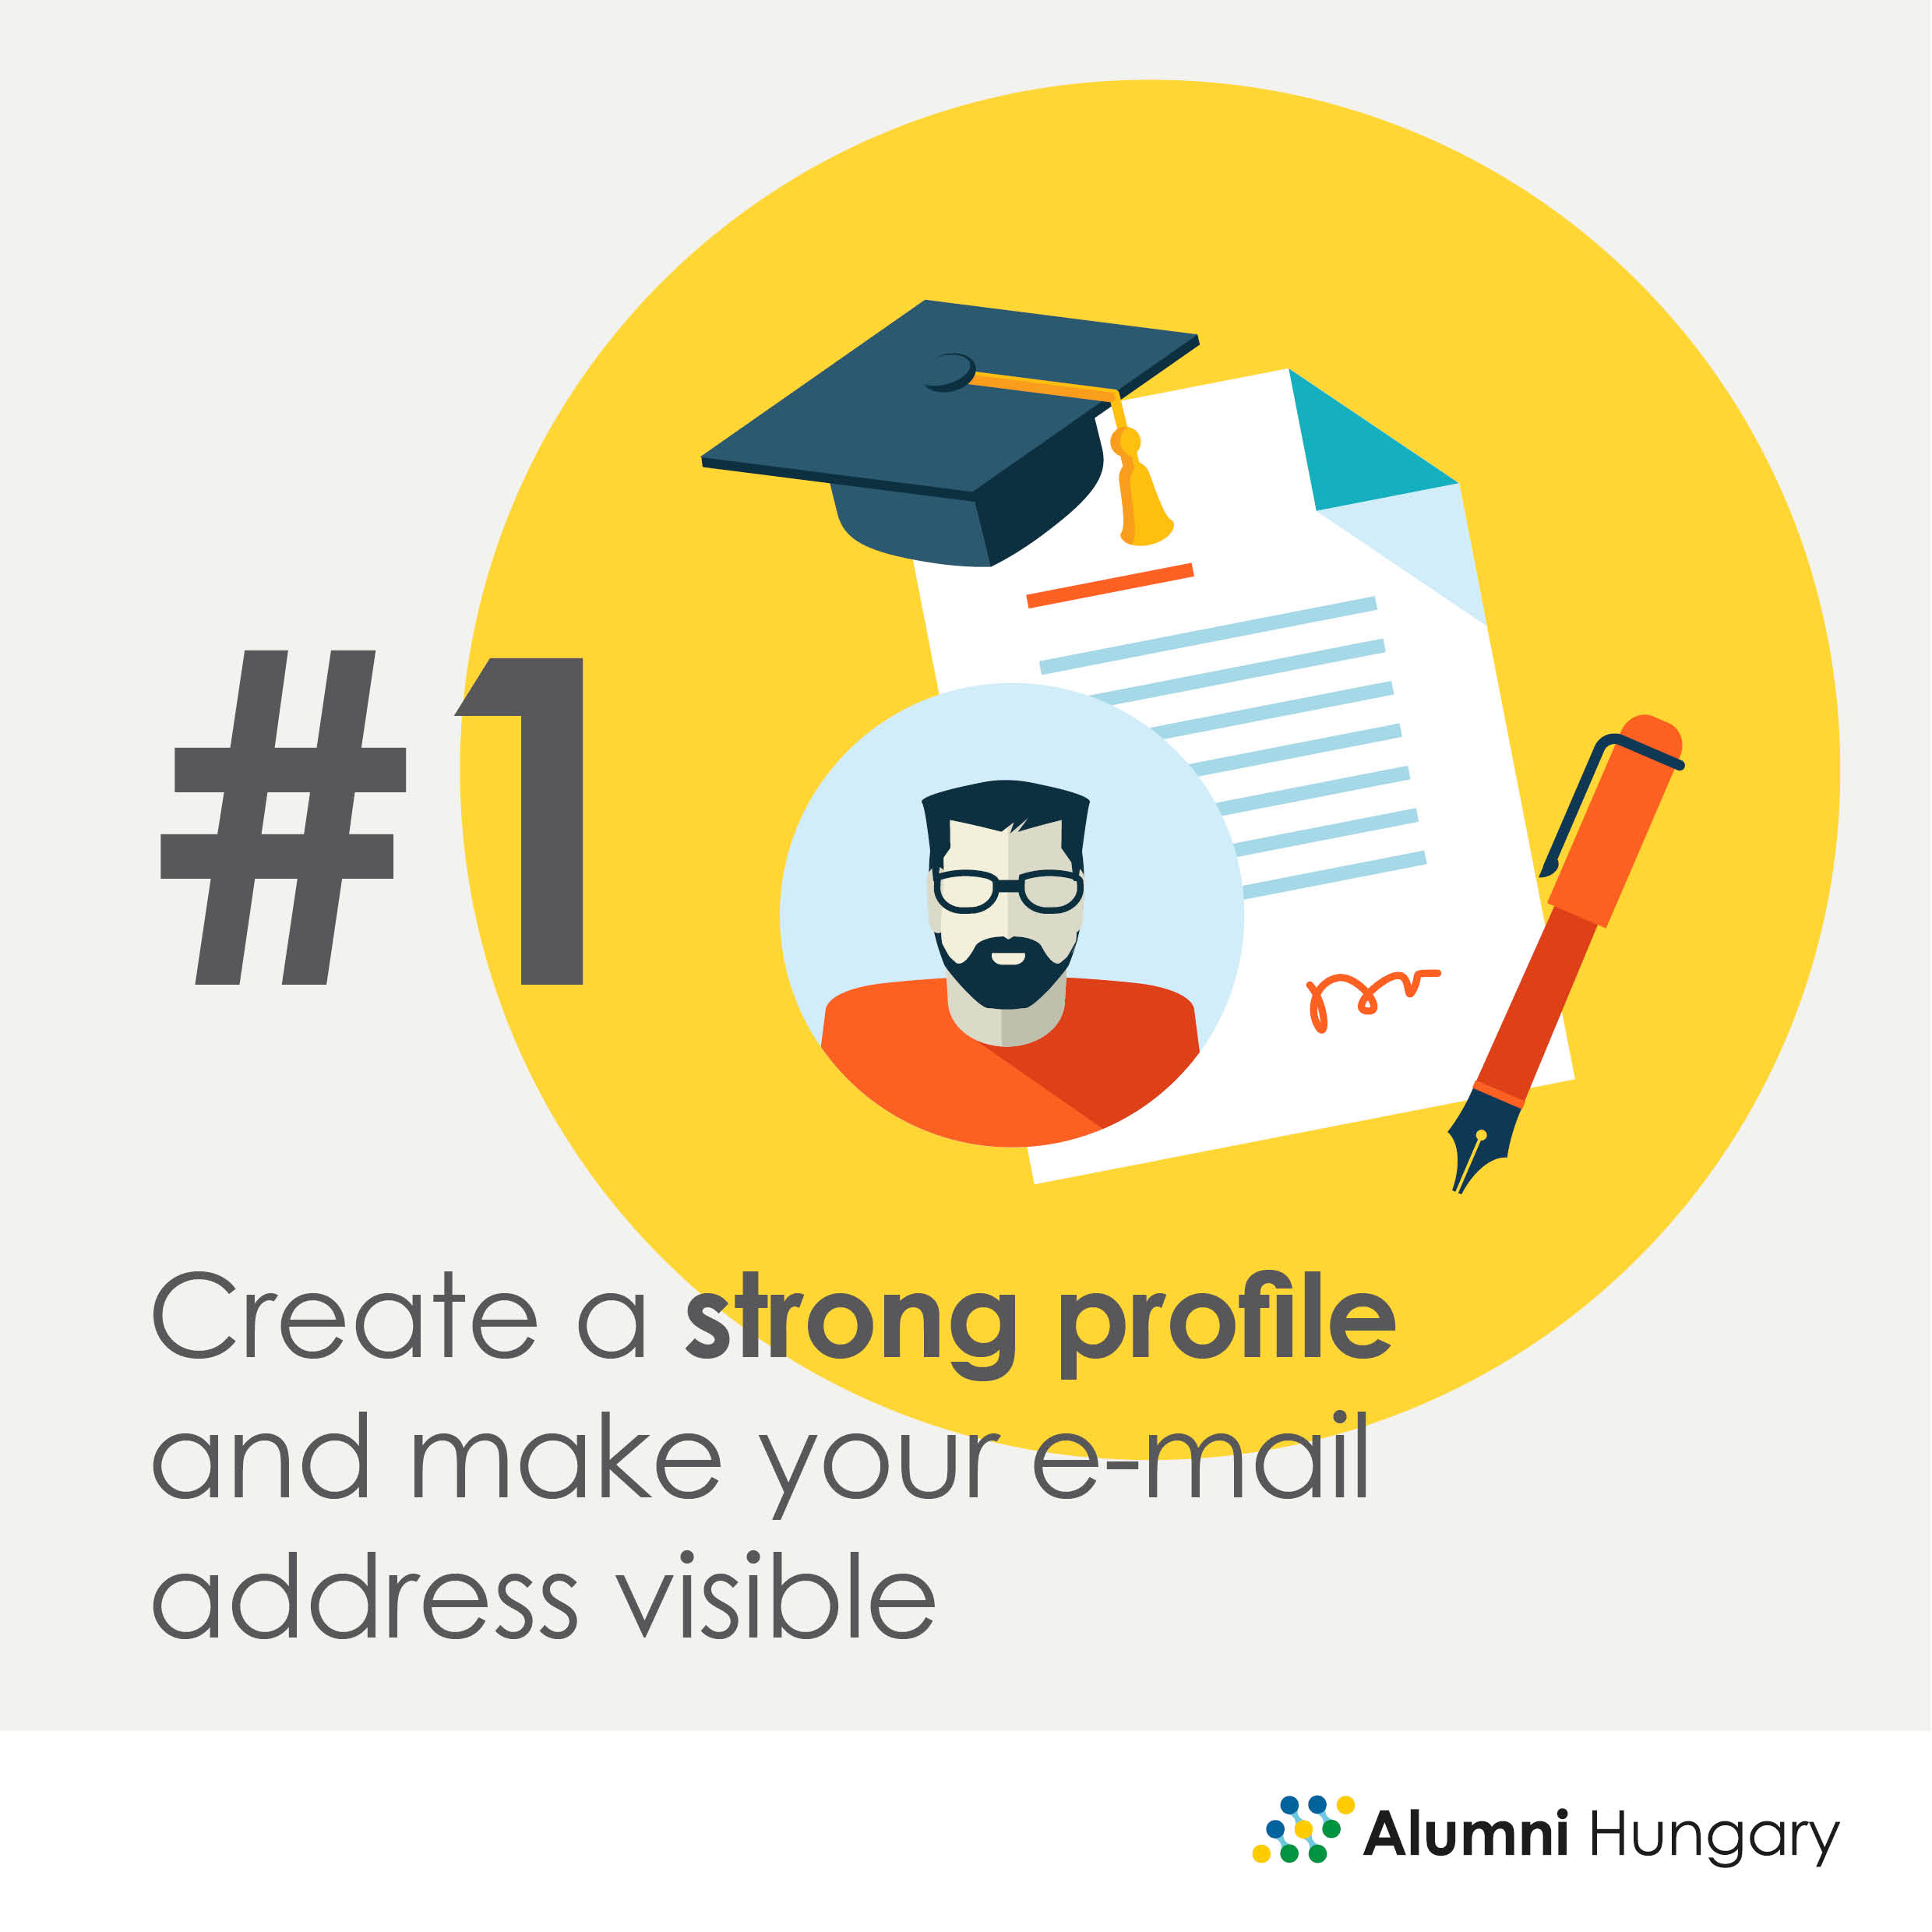 Create a strong profile and make your e-mail address visible